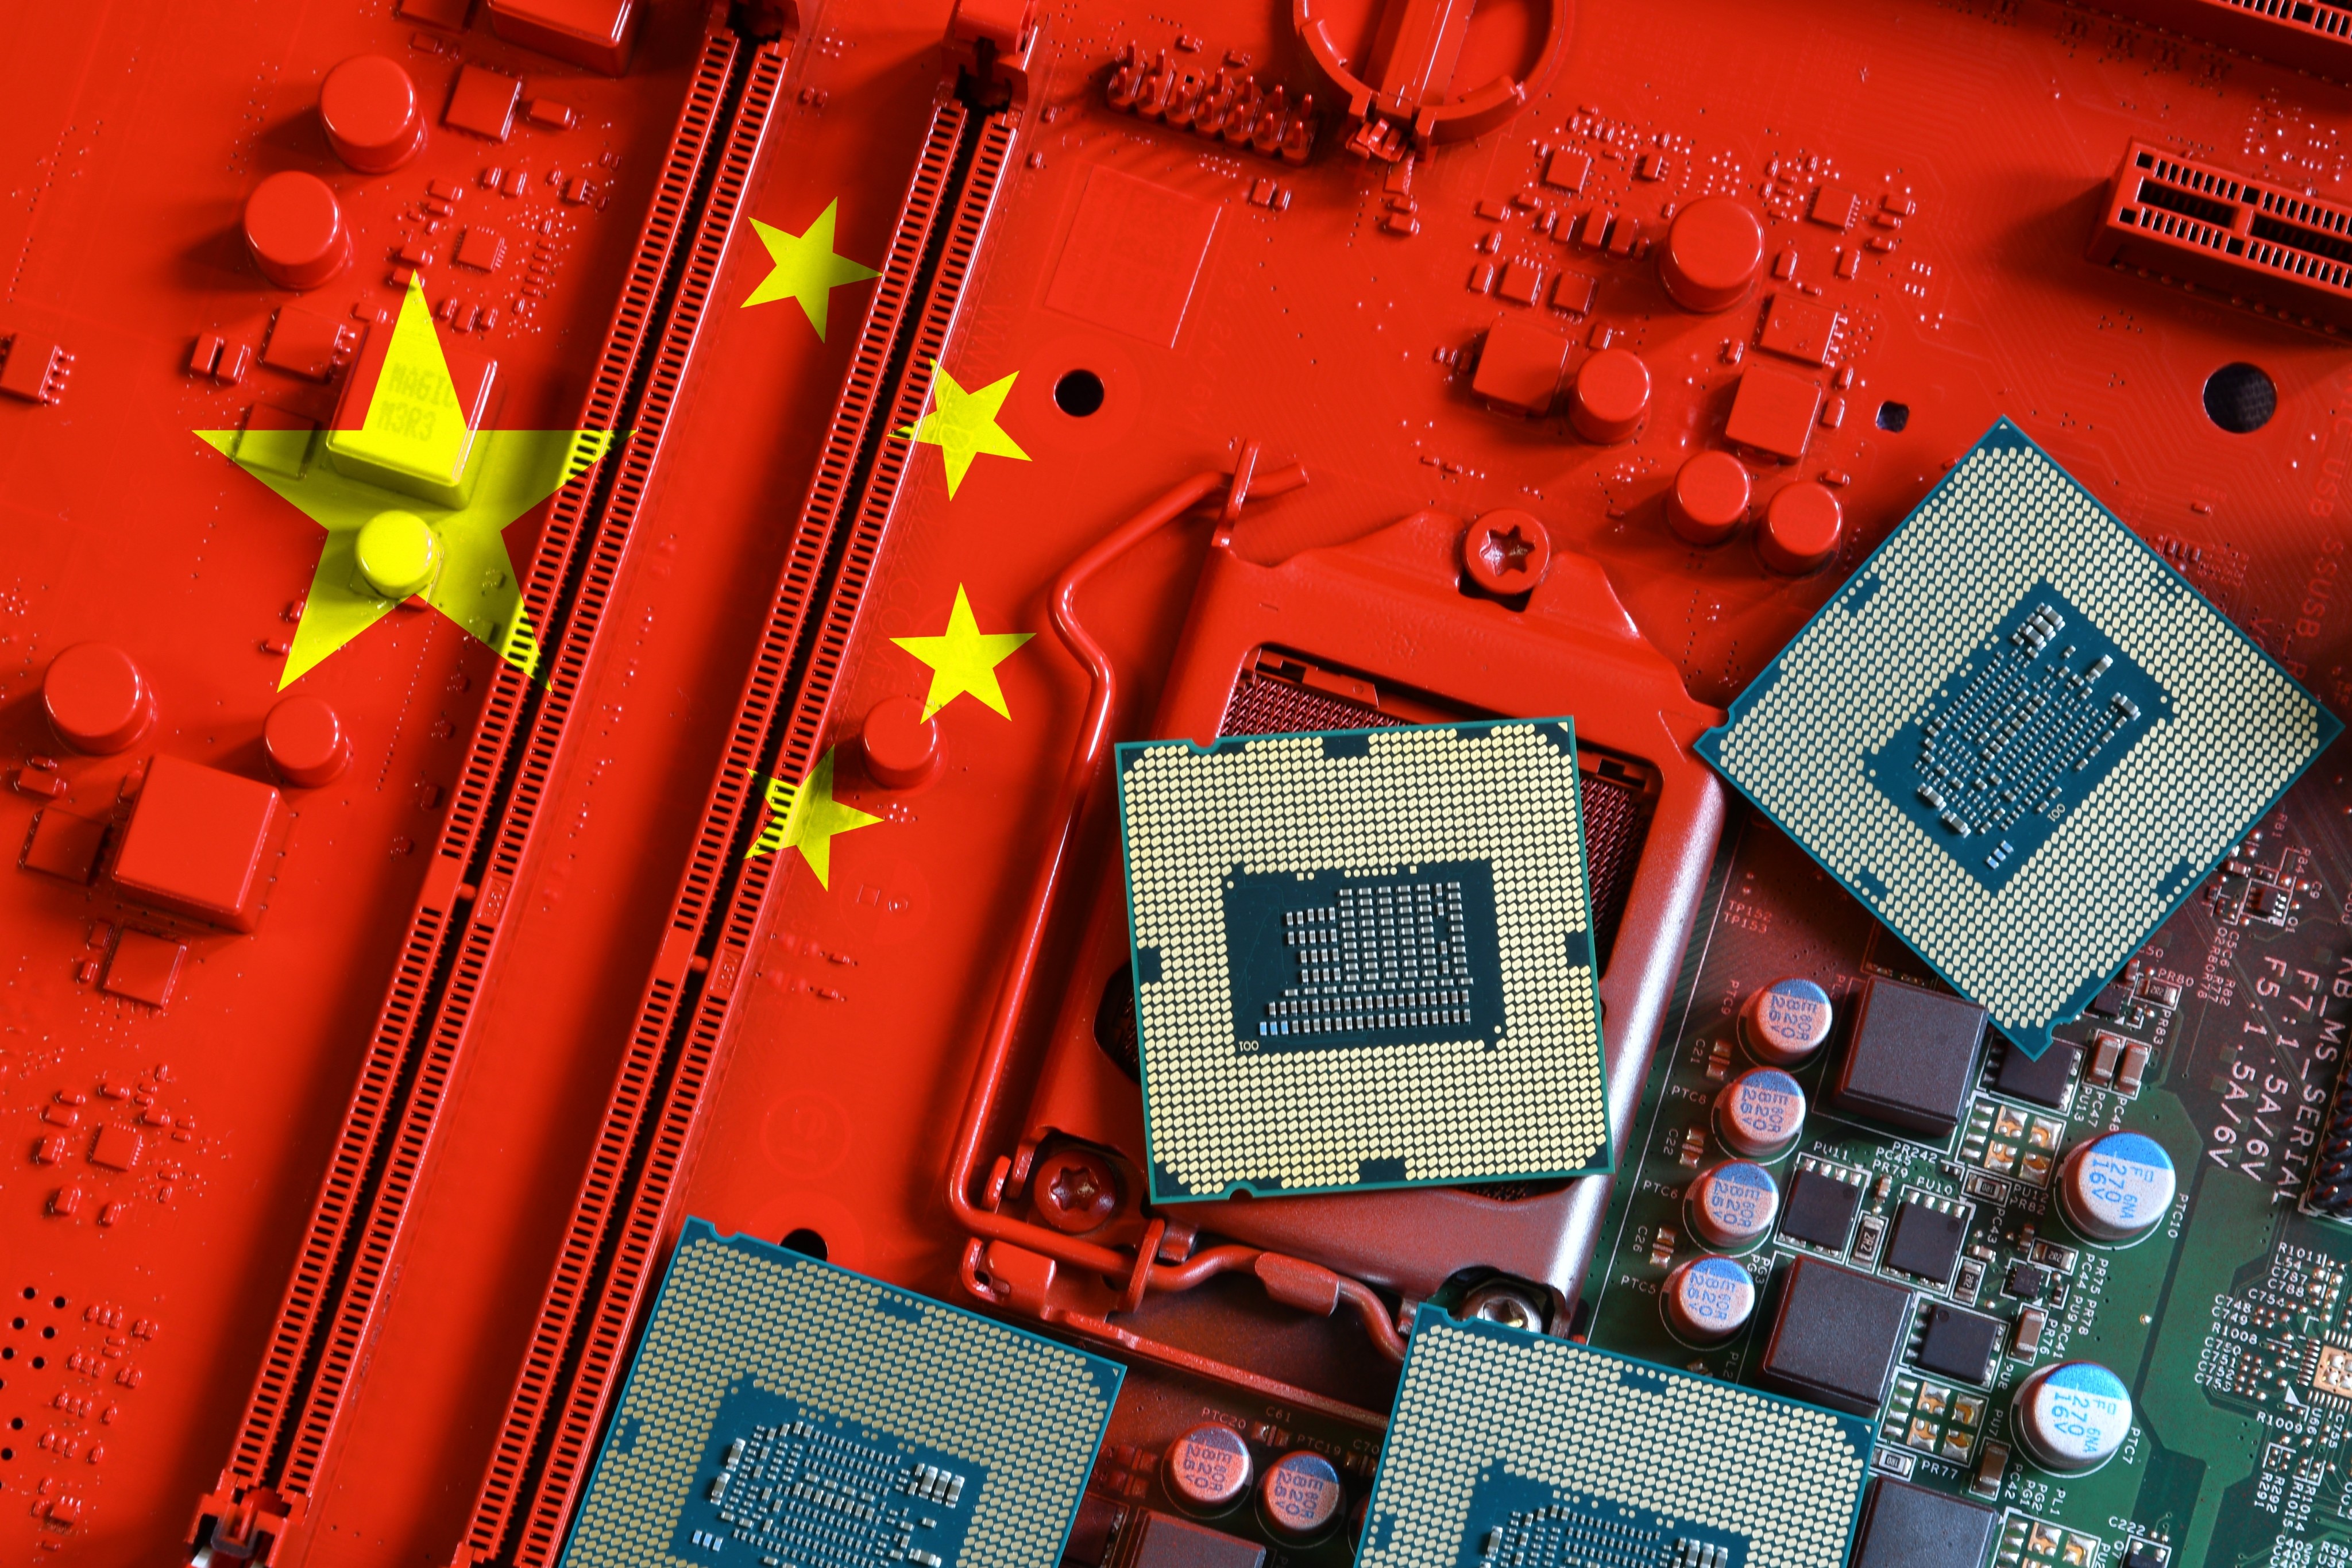 The Biden administration is expected to further tighten US semiconductor export restrictions on China. Photo: Shutterstock